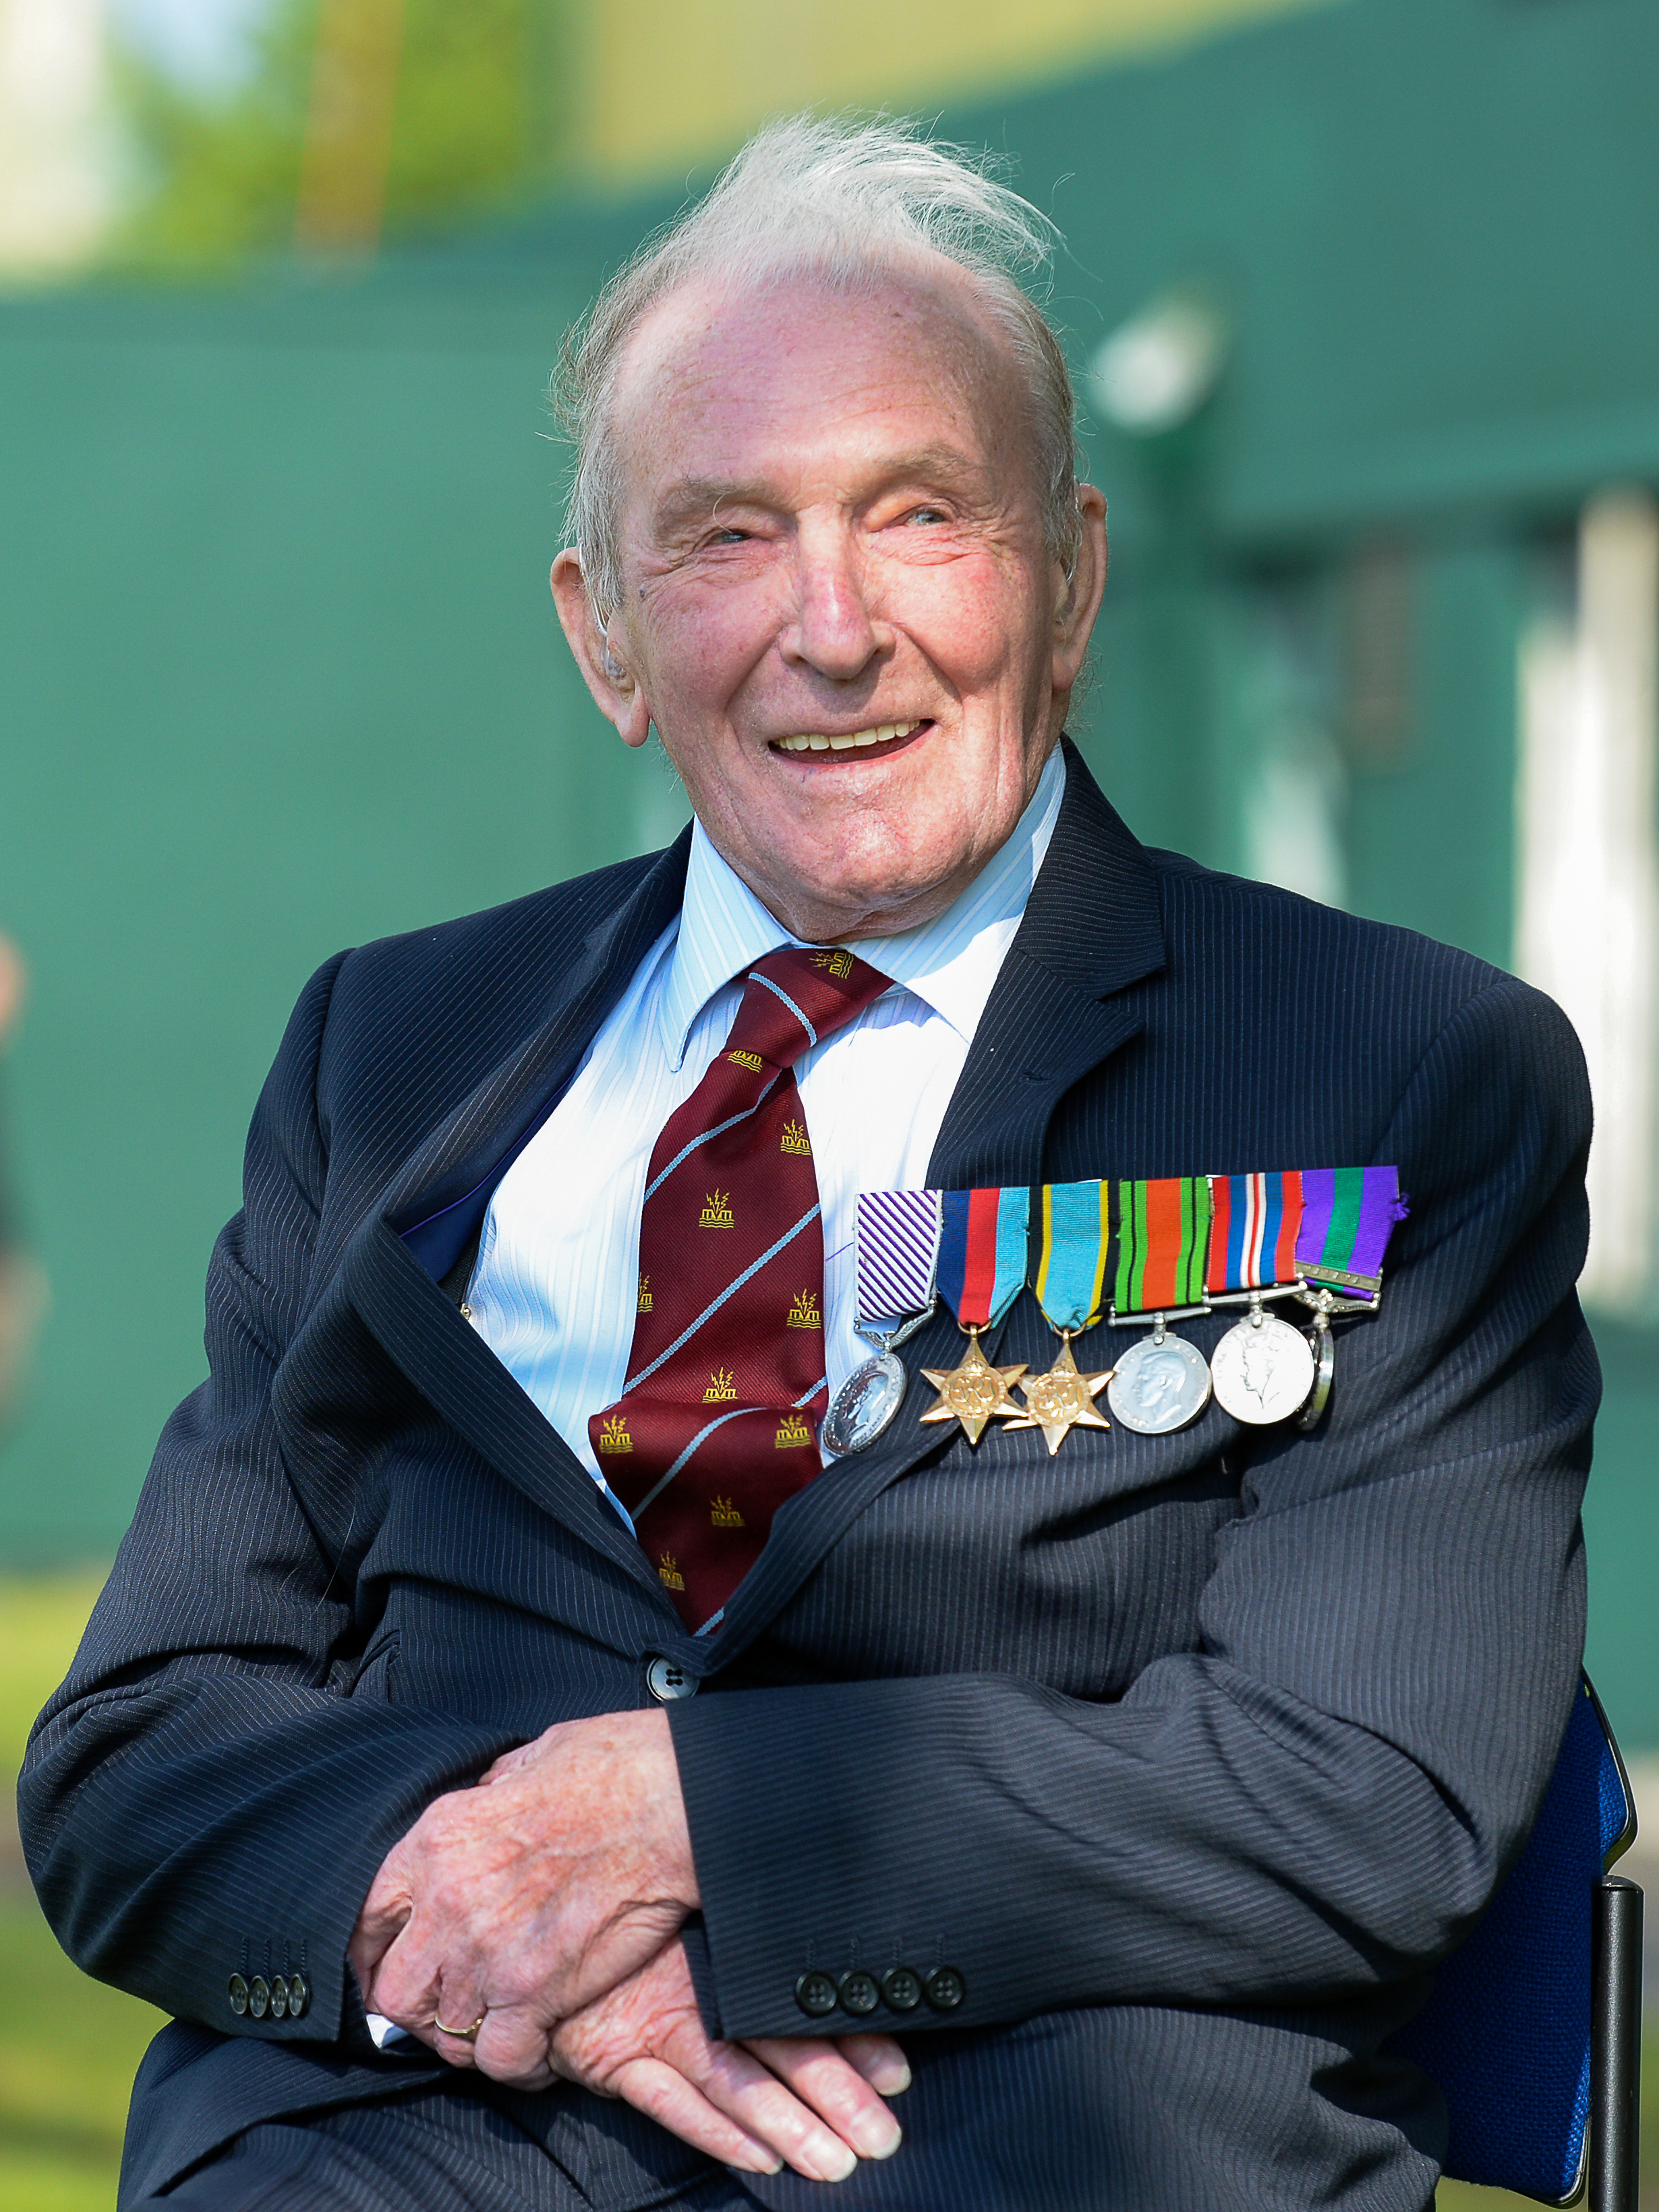 Image shows RAF Veteran wearing his medals and sitting in a chair,